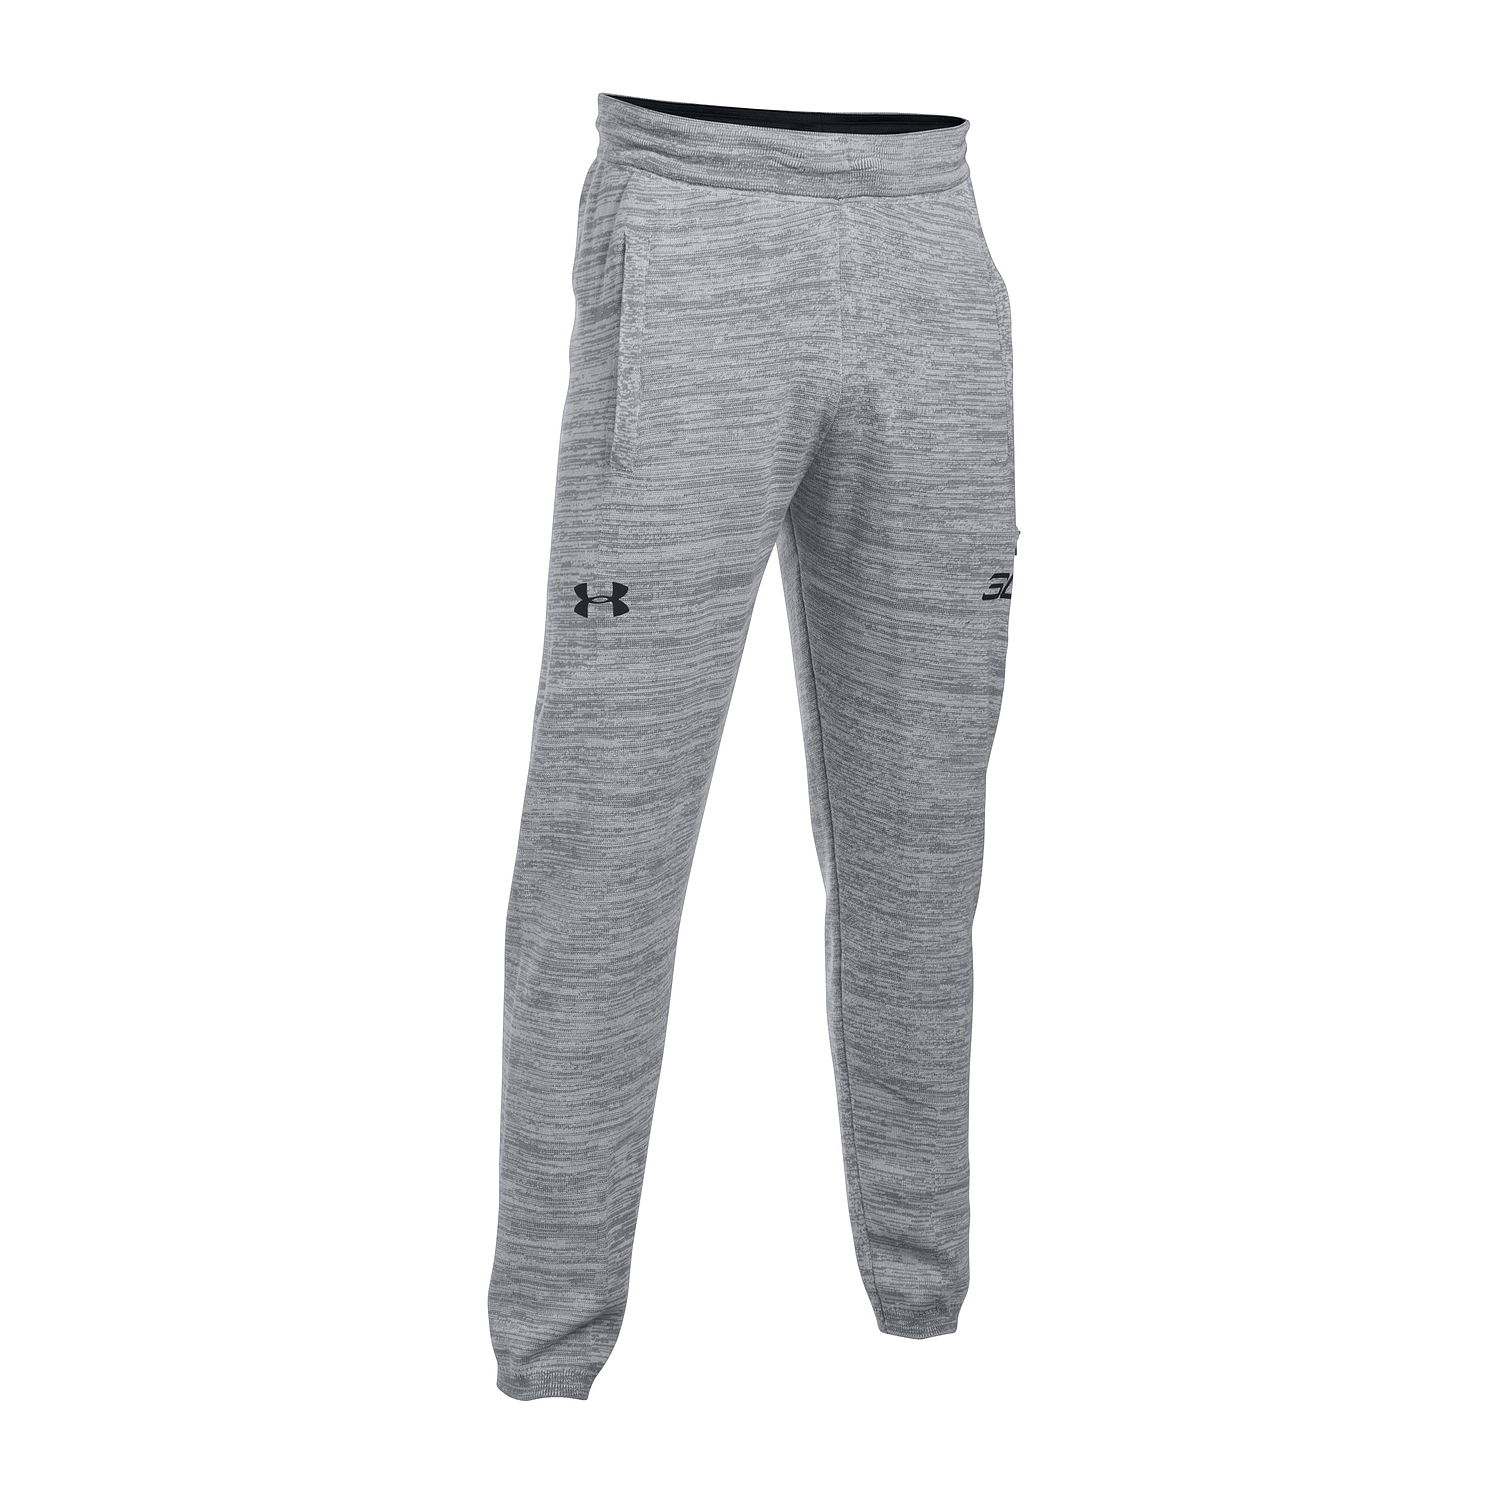 Under Armour Stephen Curry SC30 Mens Jogger Sweat Pants (XLarge, True Gray) - image 1 of 2